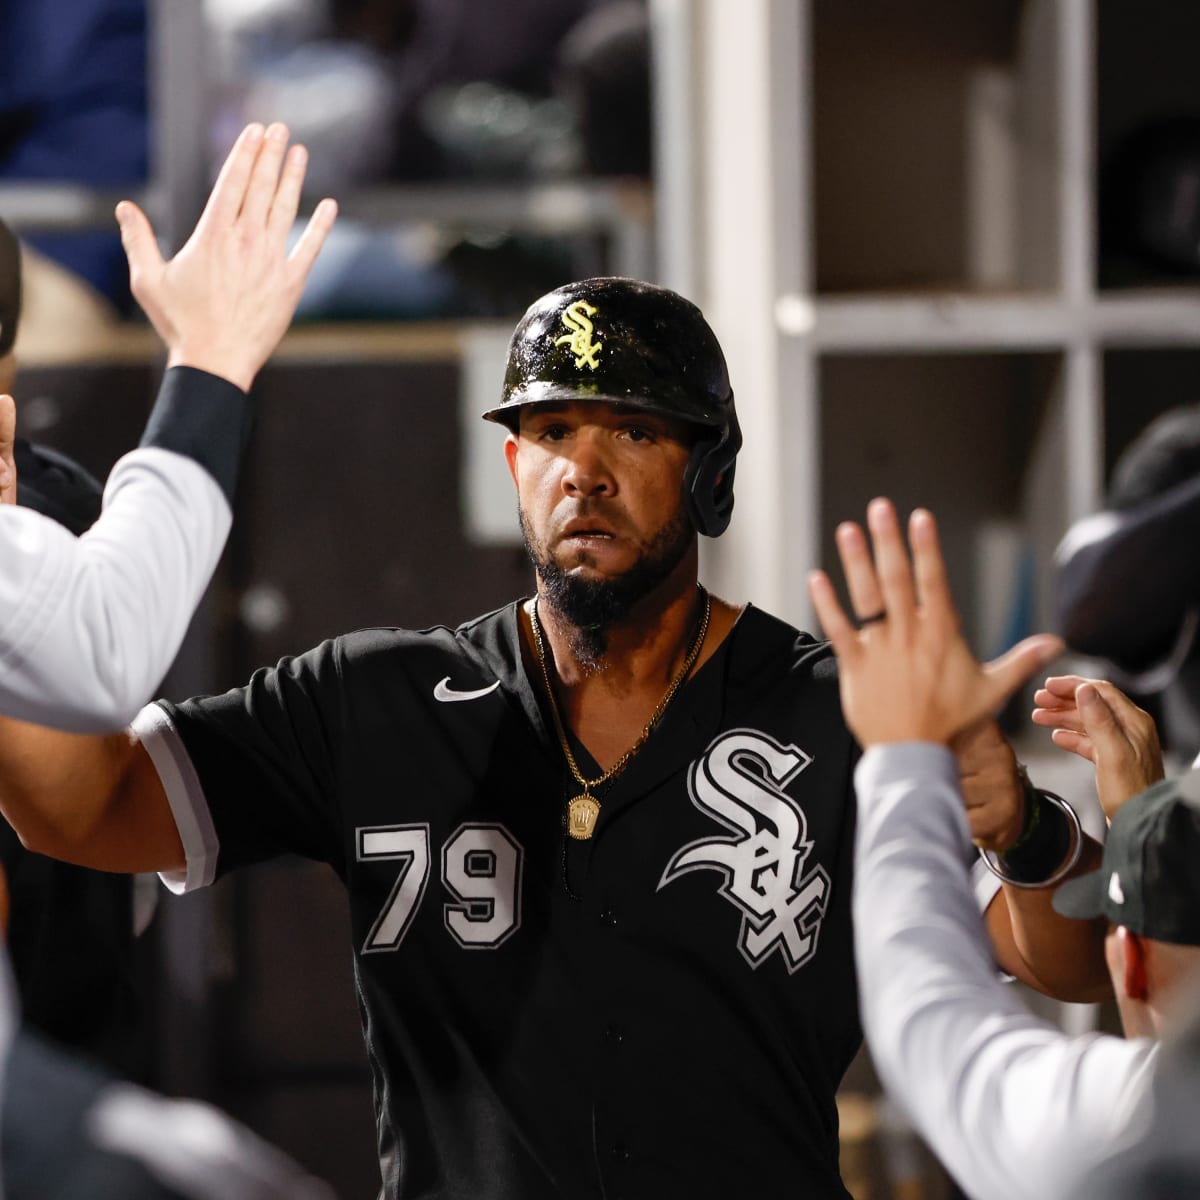 White Sox sign Jose Abreu to six-year, $68 million deal - Sports